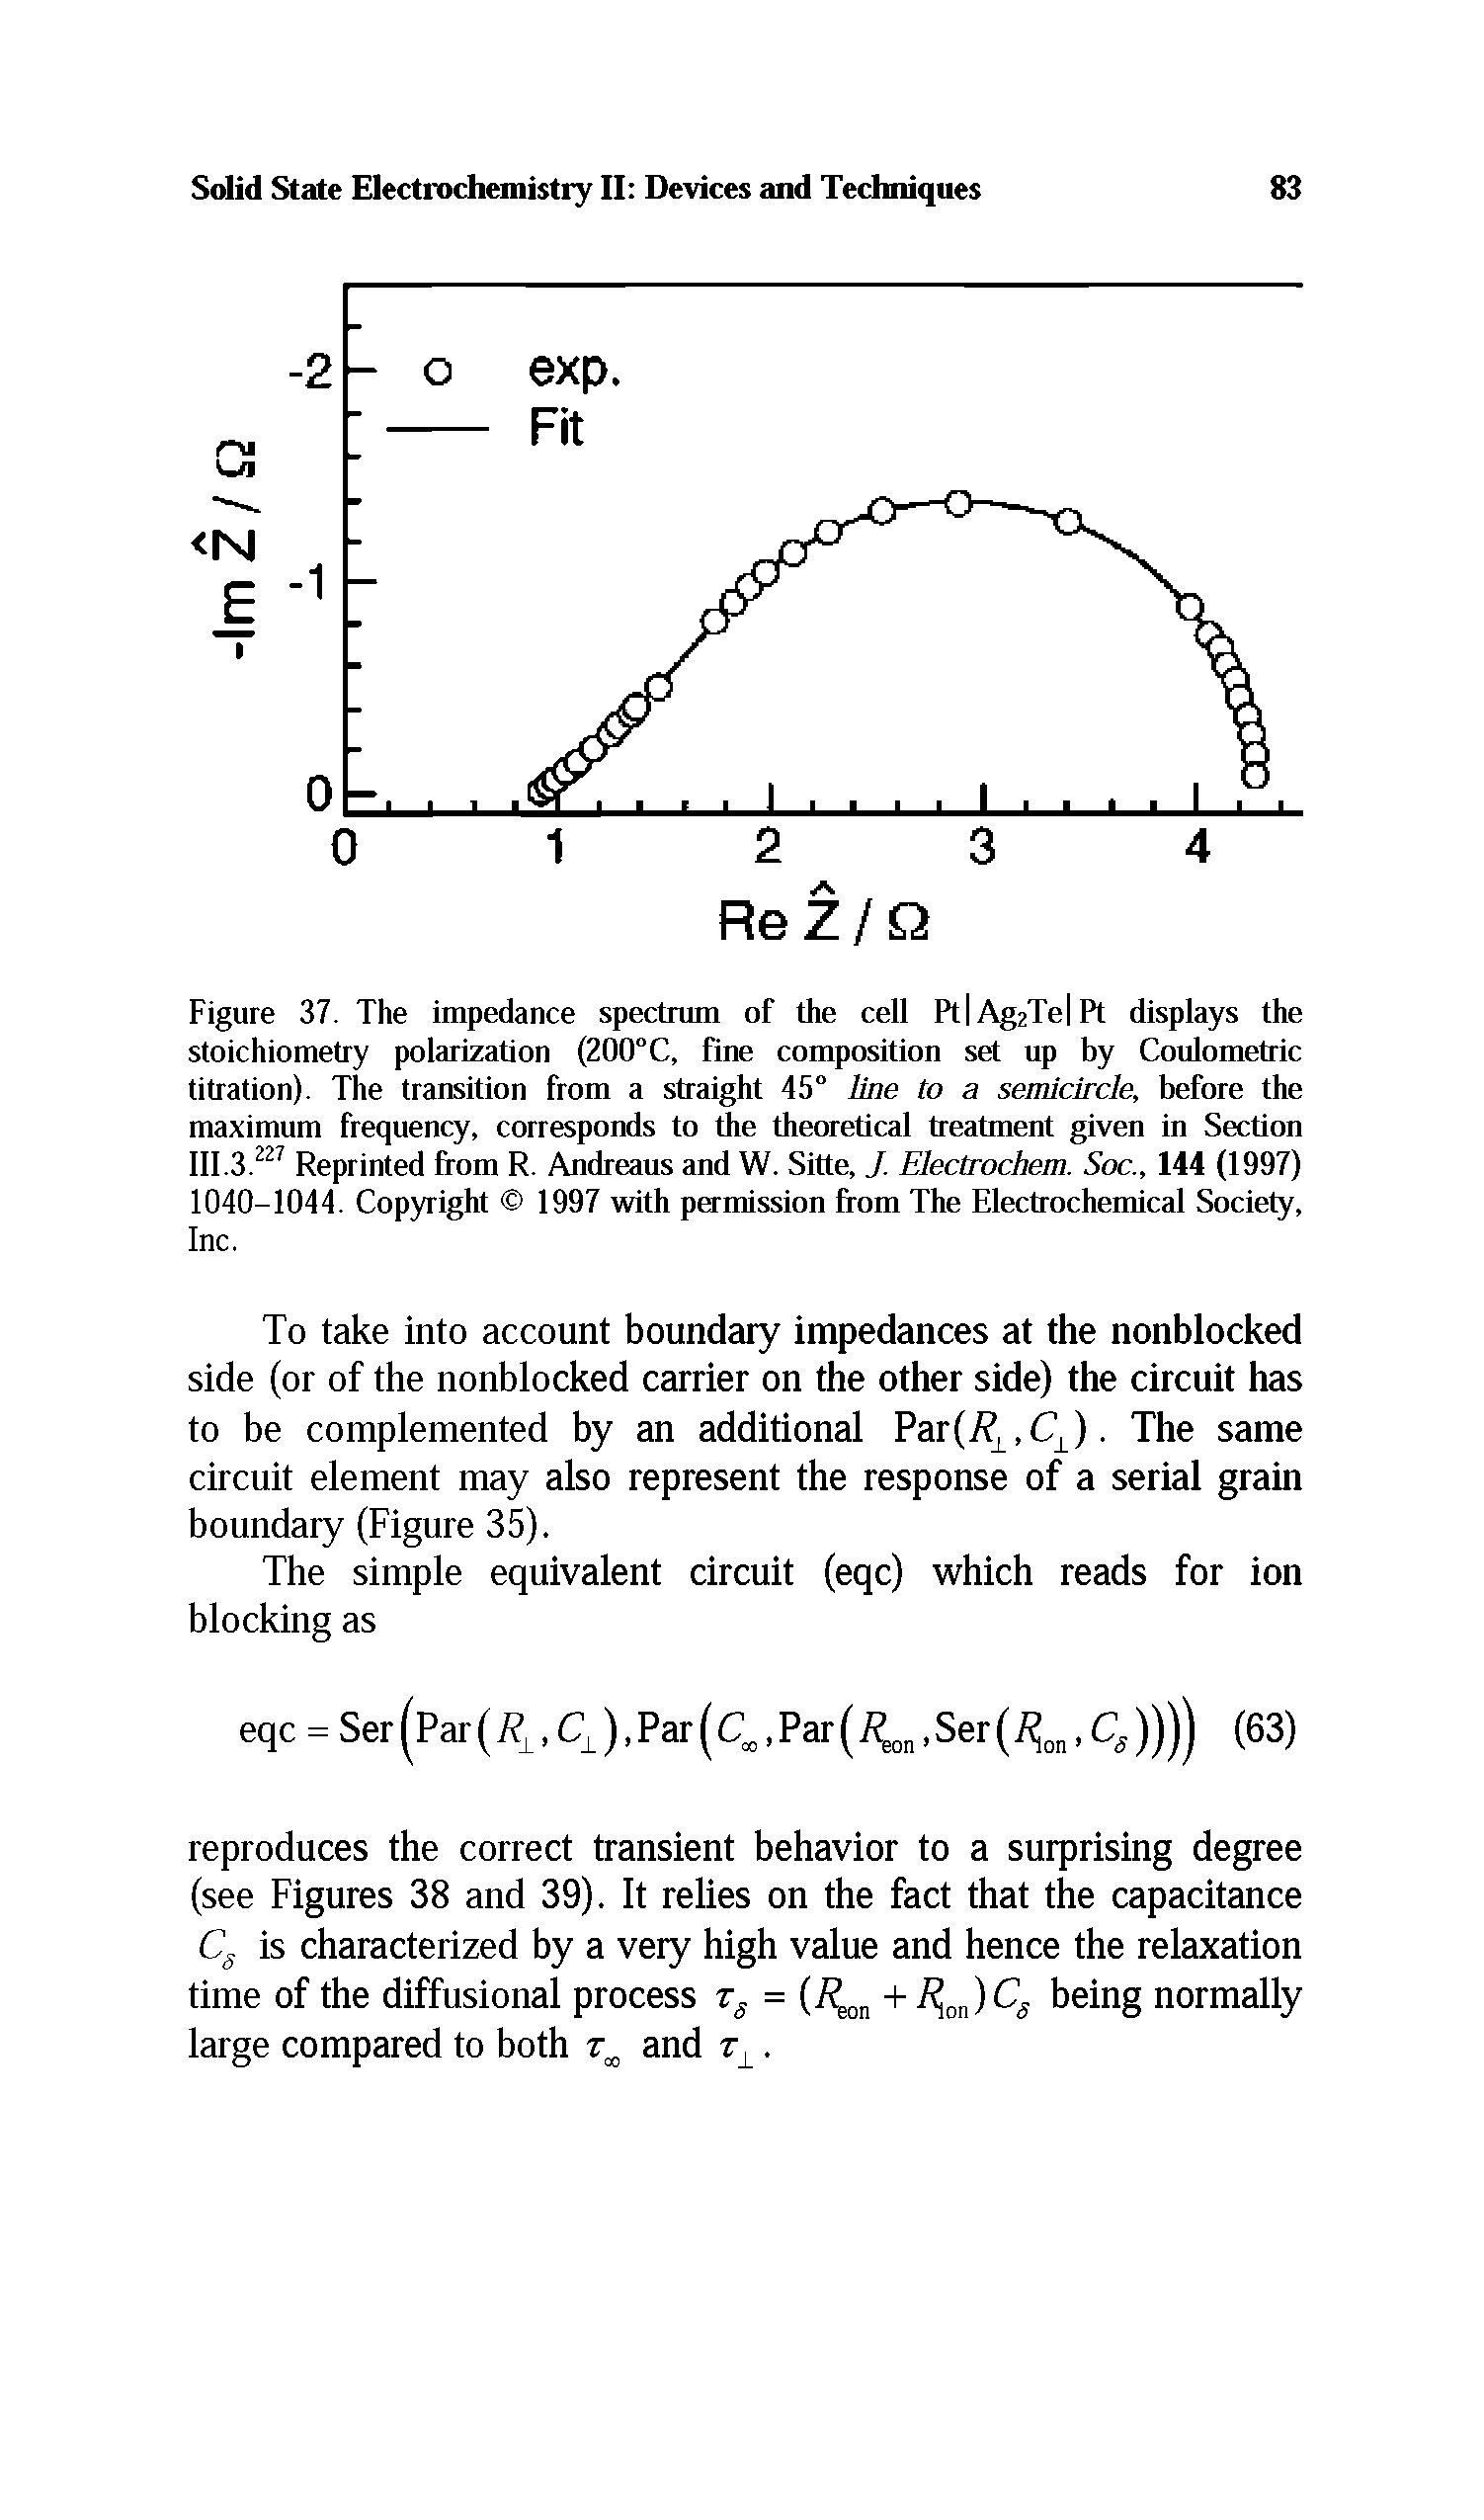 Figure 37. The impedance spectrum of the cell Pt Ag2Te Pt displays the stoichiometry polarization (200°C, fine composition set up by Coulometric titration). The transition from a straight 45° line to a semicircle, before the maximum frequency, corresponds to the theoretical treatment given in Section III.3.227 Reprinted from R. Andreaus and W. Sitte, J. Electrochem. Soc., 144 (1997) 1040-1044. Copyright 1997 with permission from The Electrochemical Society, Inc.